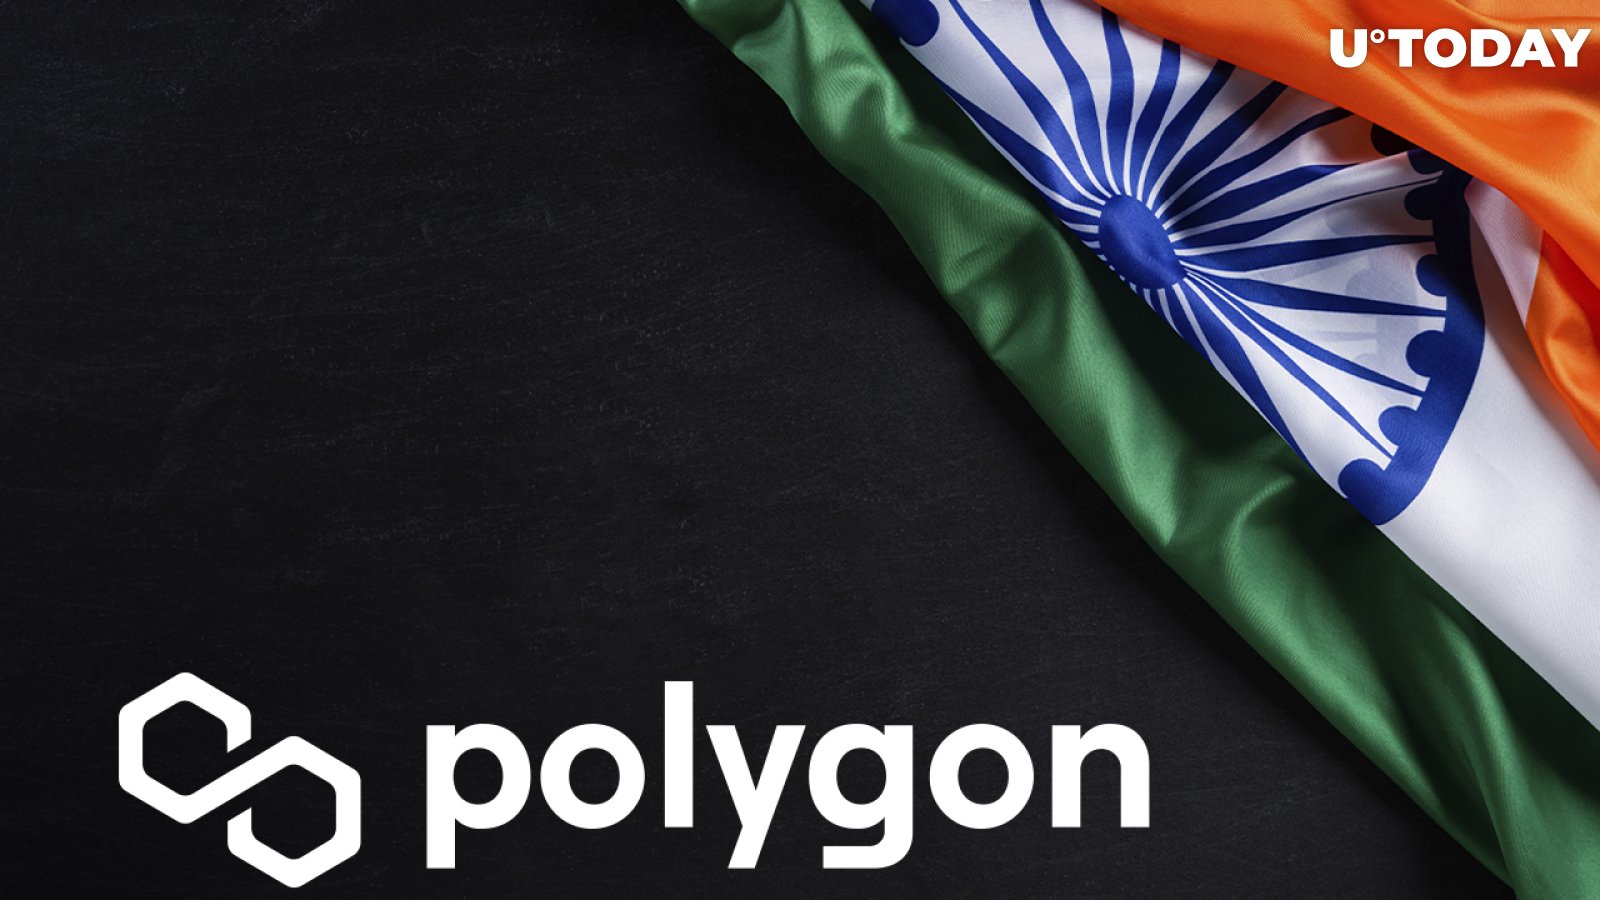 Polygon Teases Major Release for Indian Gaming Community Soon